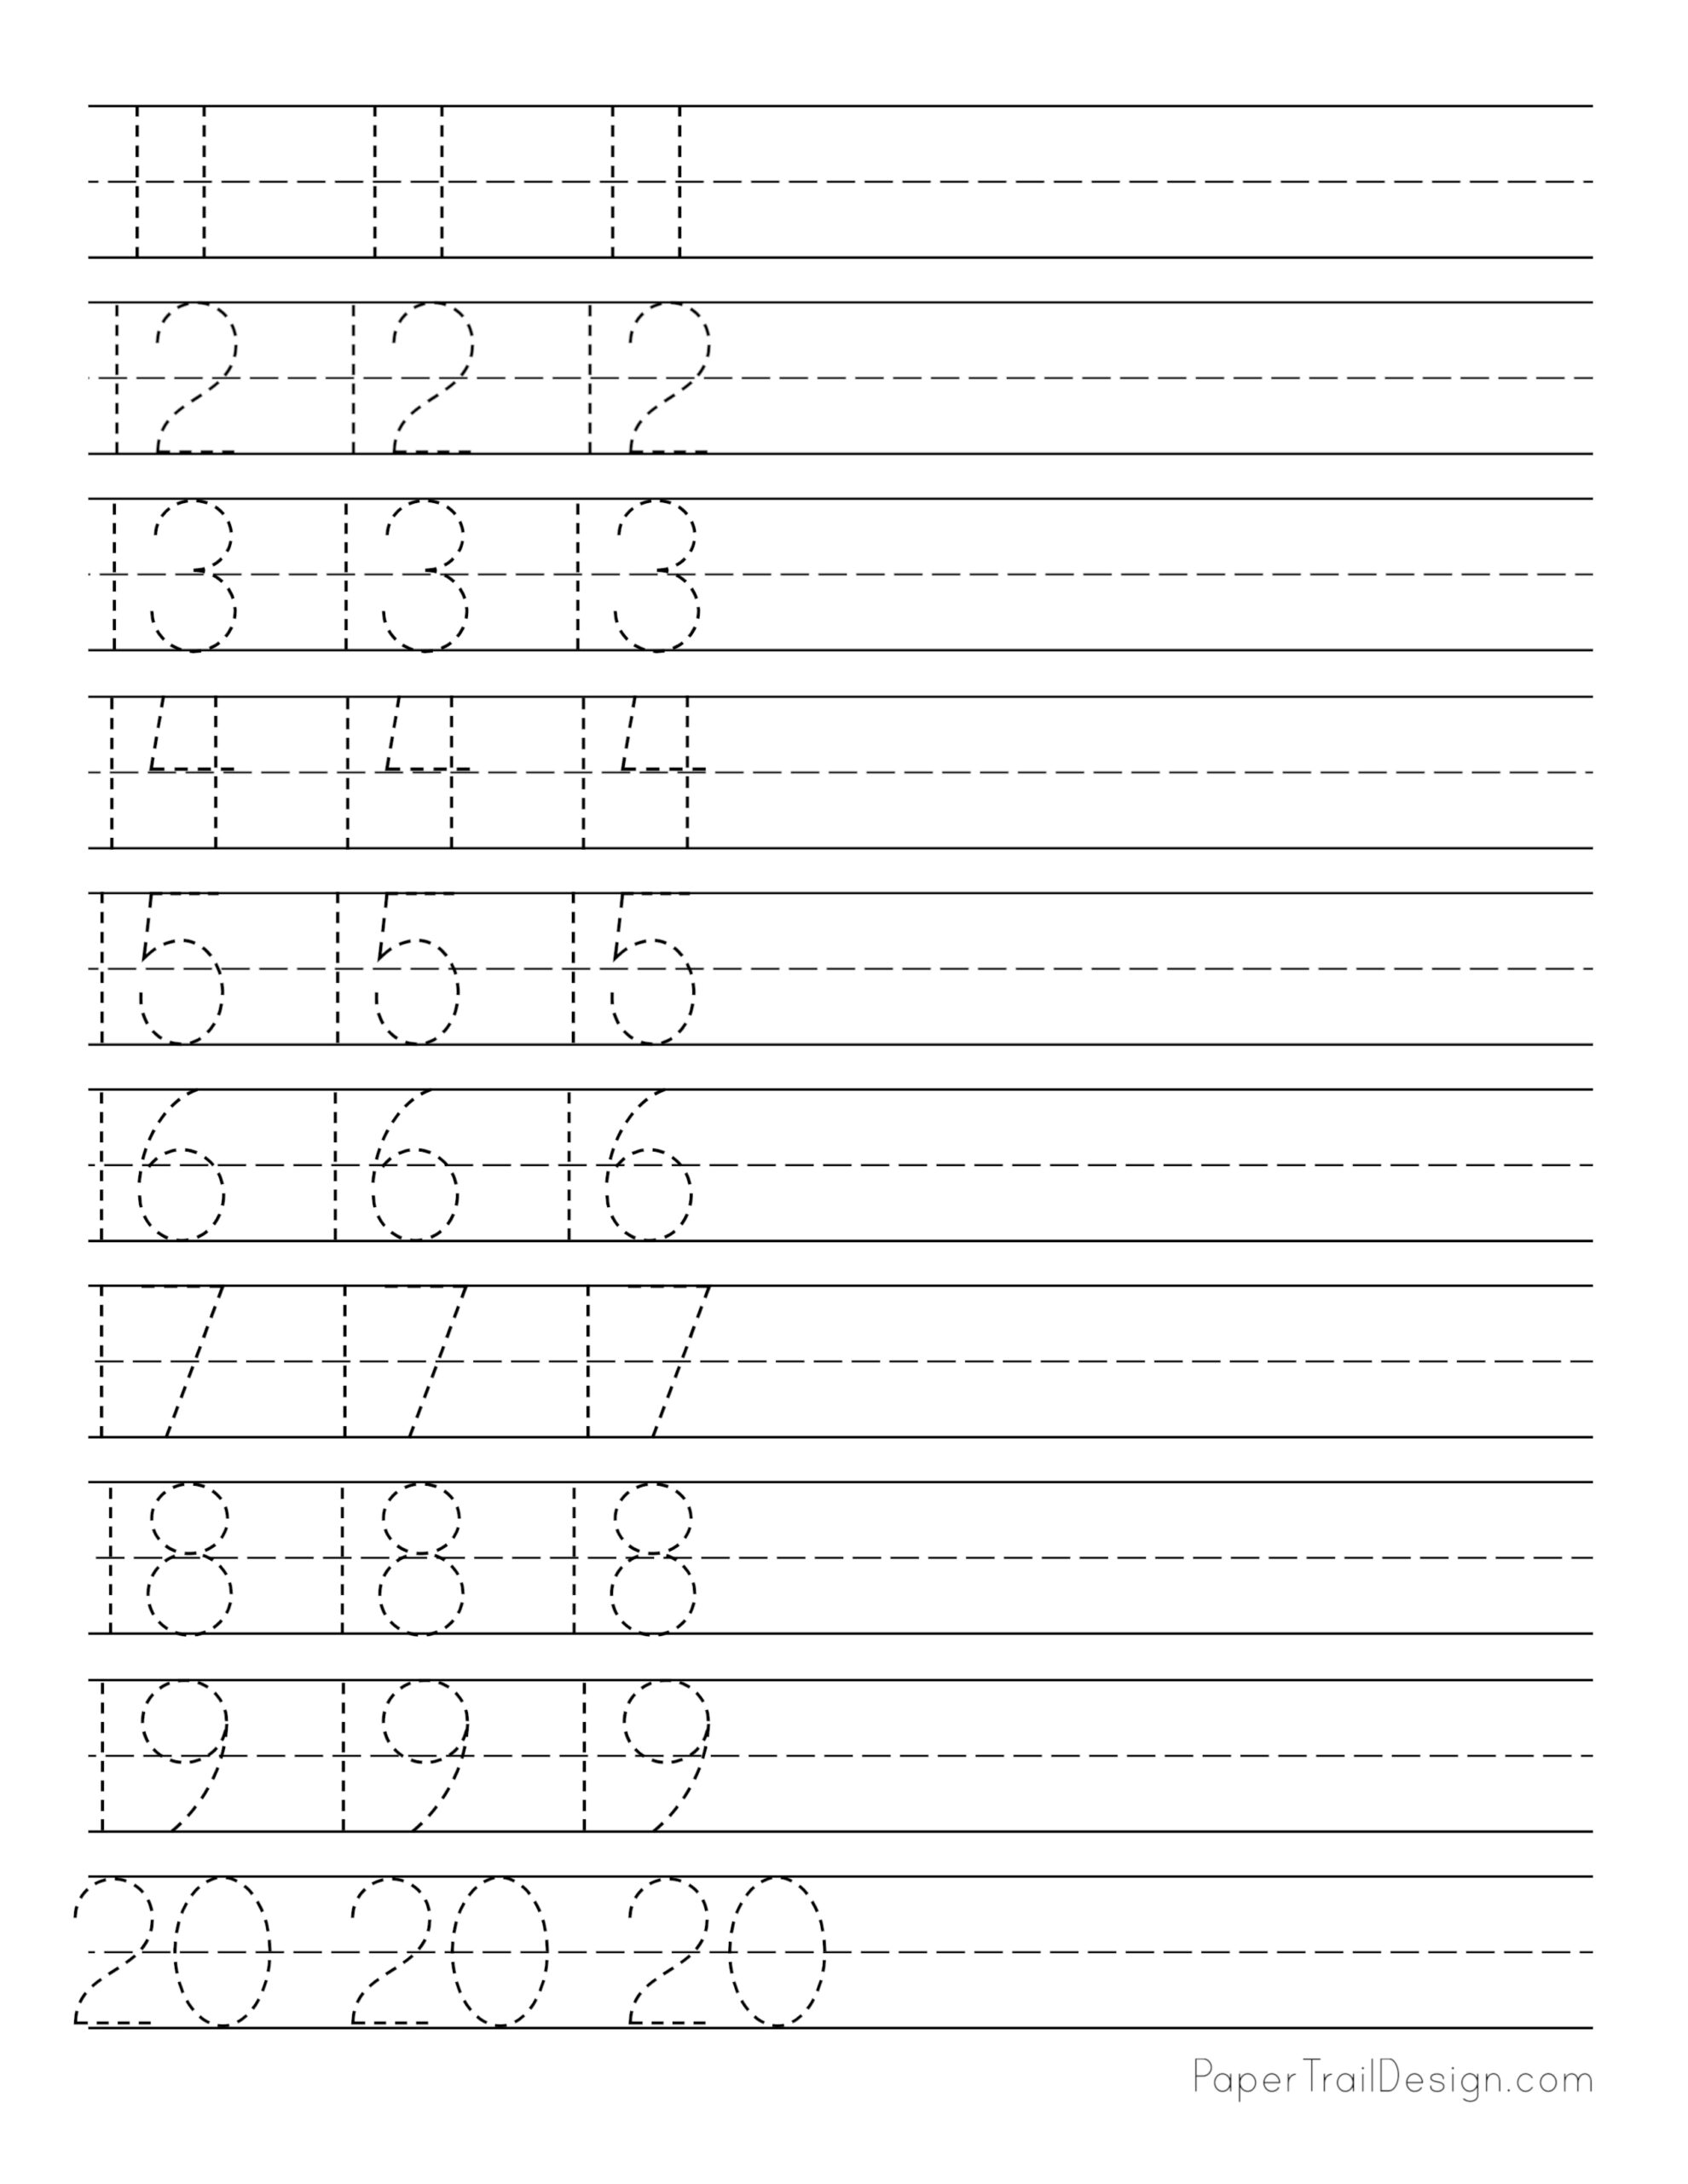 free-trace-the-numbers-11-20-worksheets-for-kids-free-printable